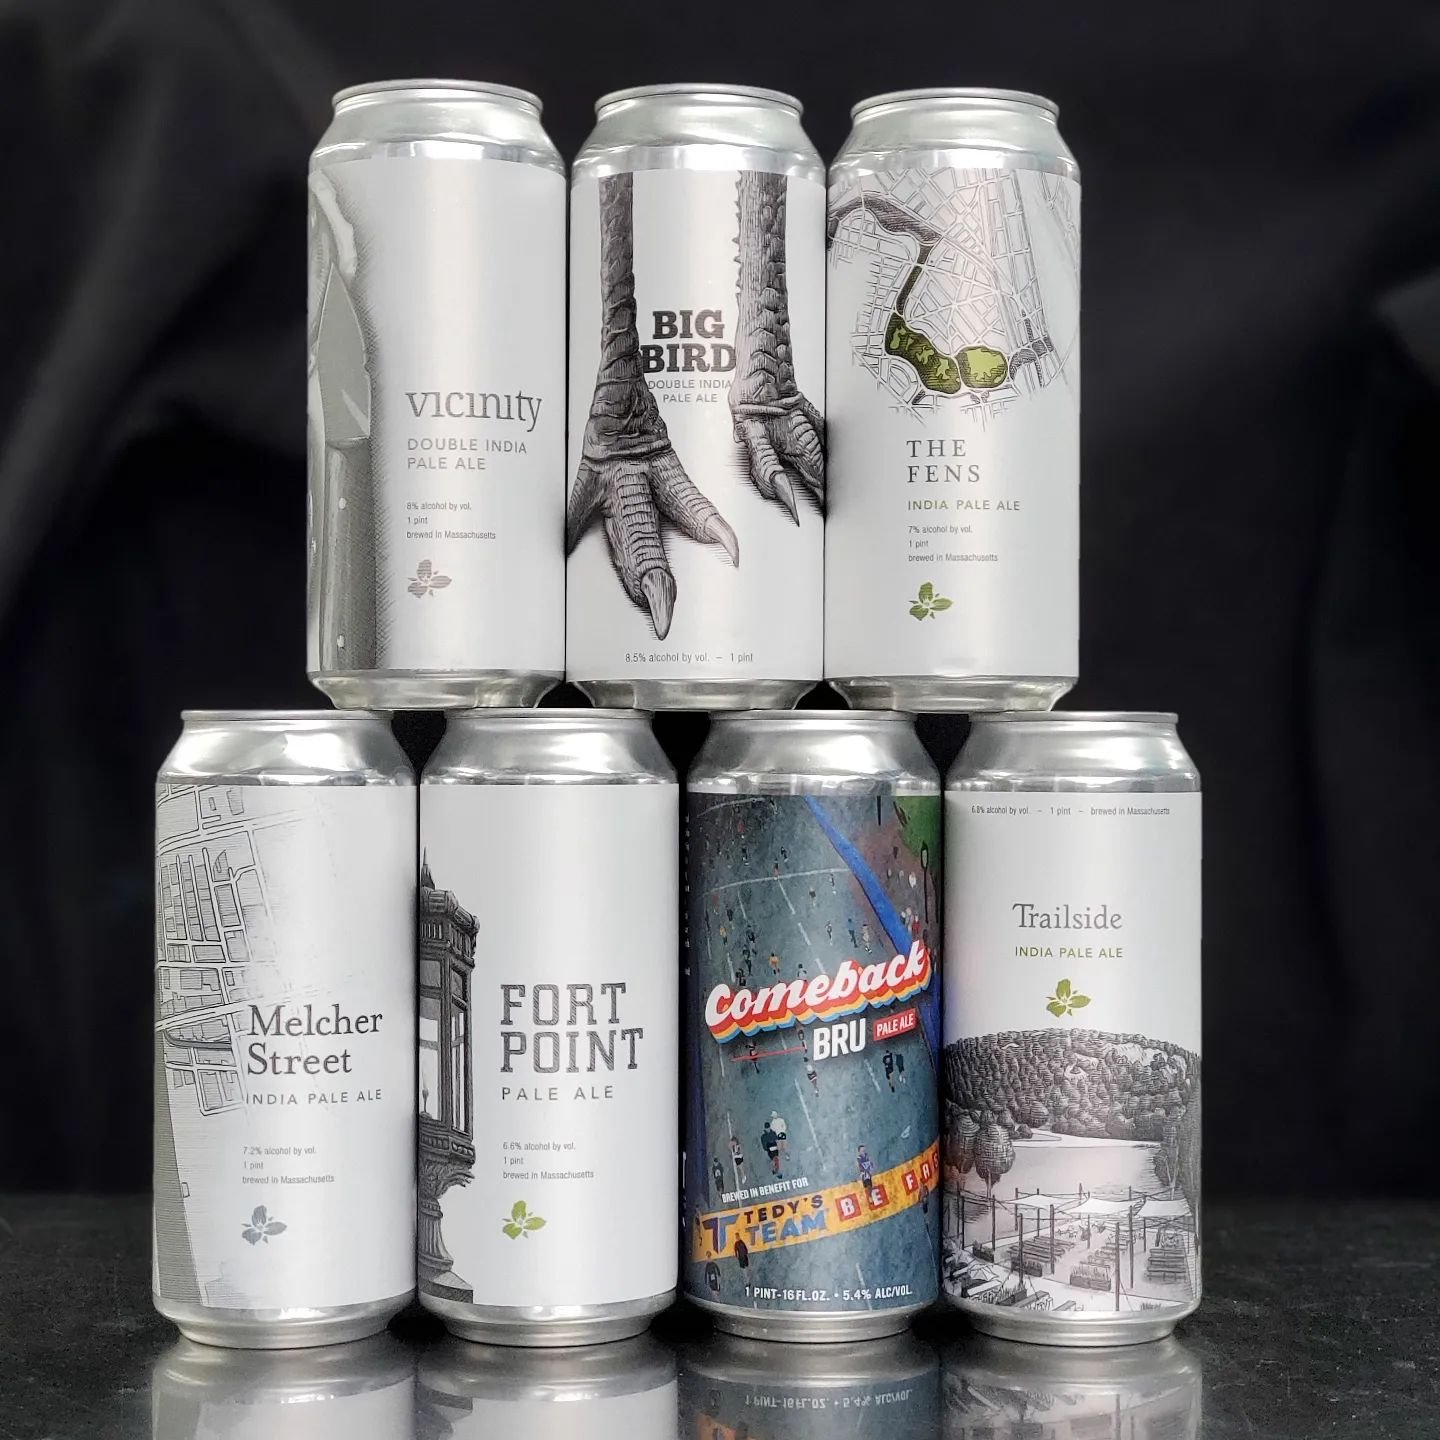 Veryyy nice drop of Trillium today! Two pale ales, three IPAs, and two double IPAs🍻 With this much variety we're going no limits, so swing on by when you can!

#dipa #ipa #paleale #trilliumbrewing #trillium #melcherstreet